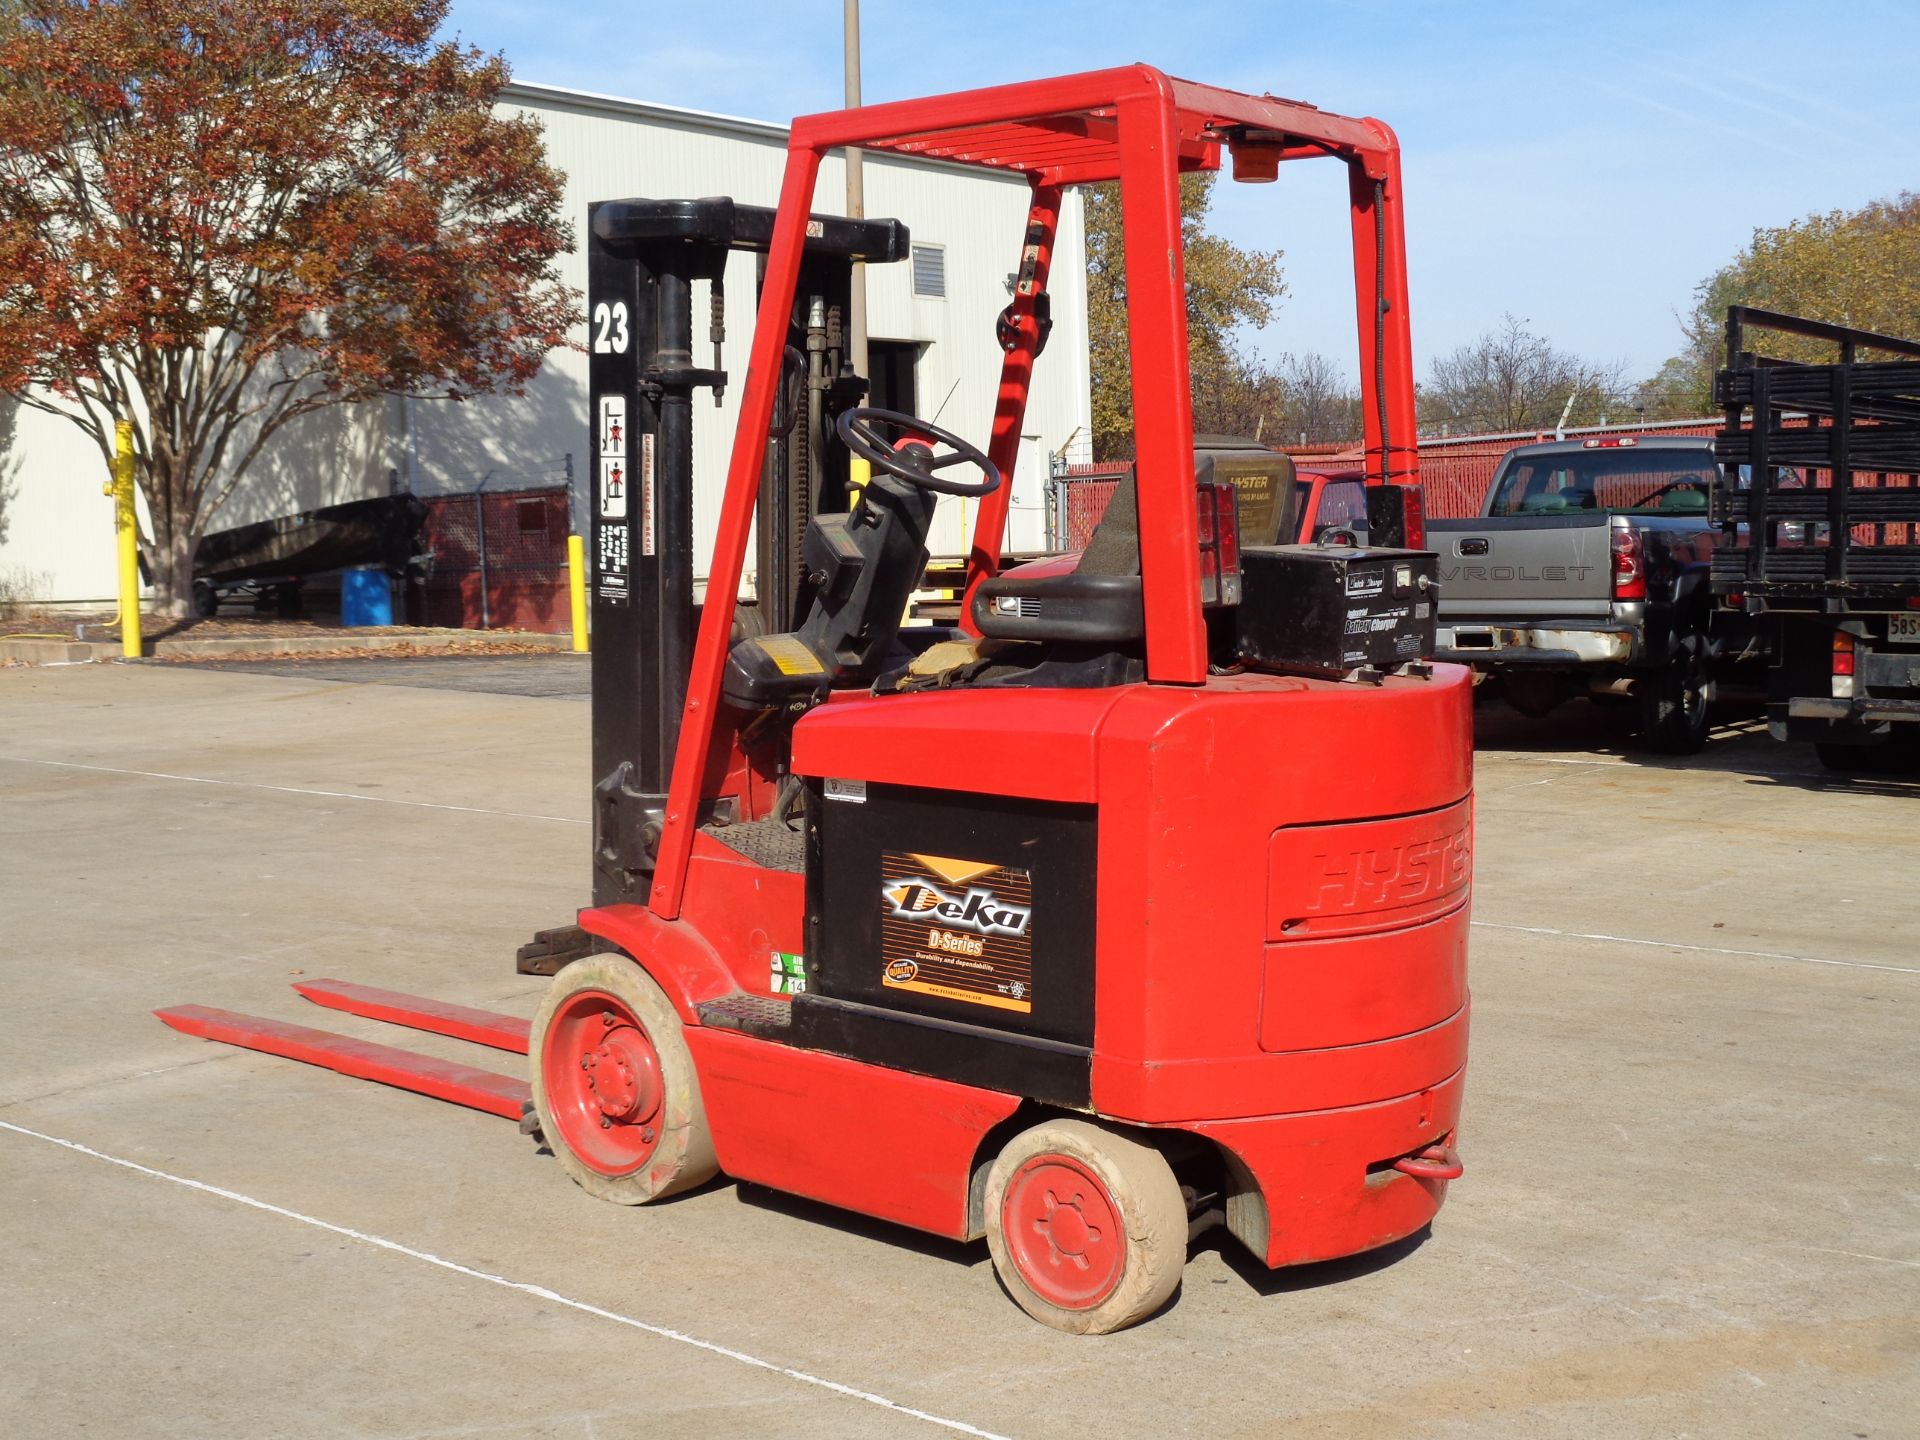 1999 Hyster E50XM-27 Forklift - 5,000 lbs - Image 3 of 5